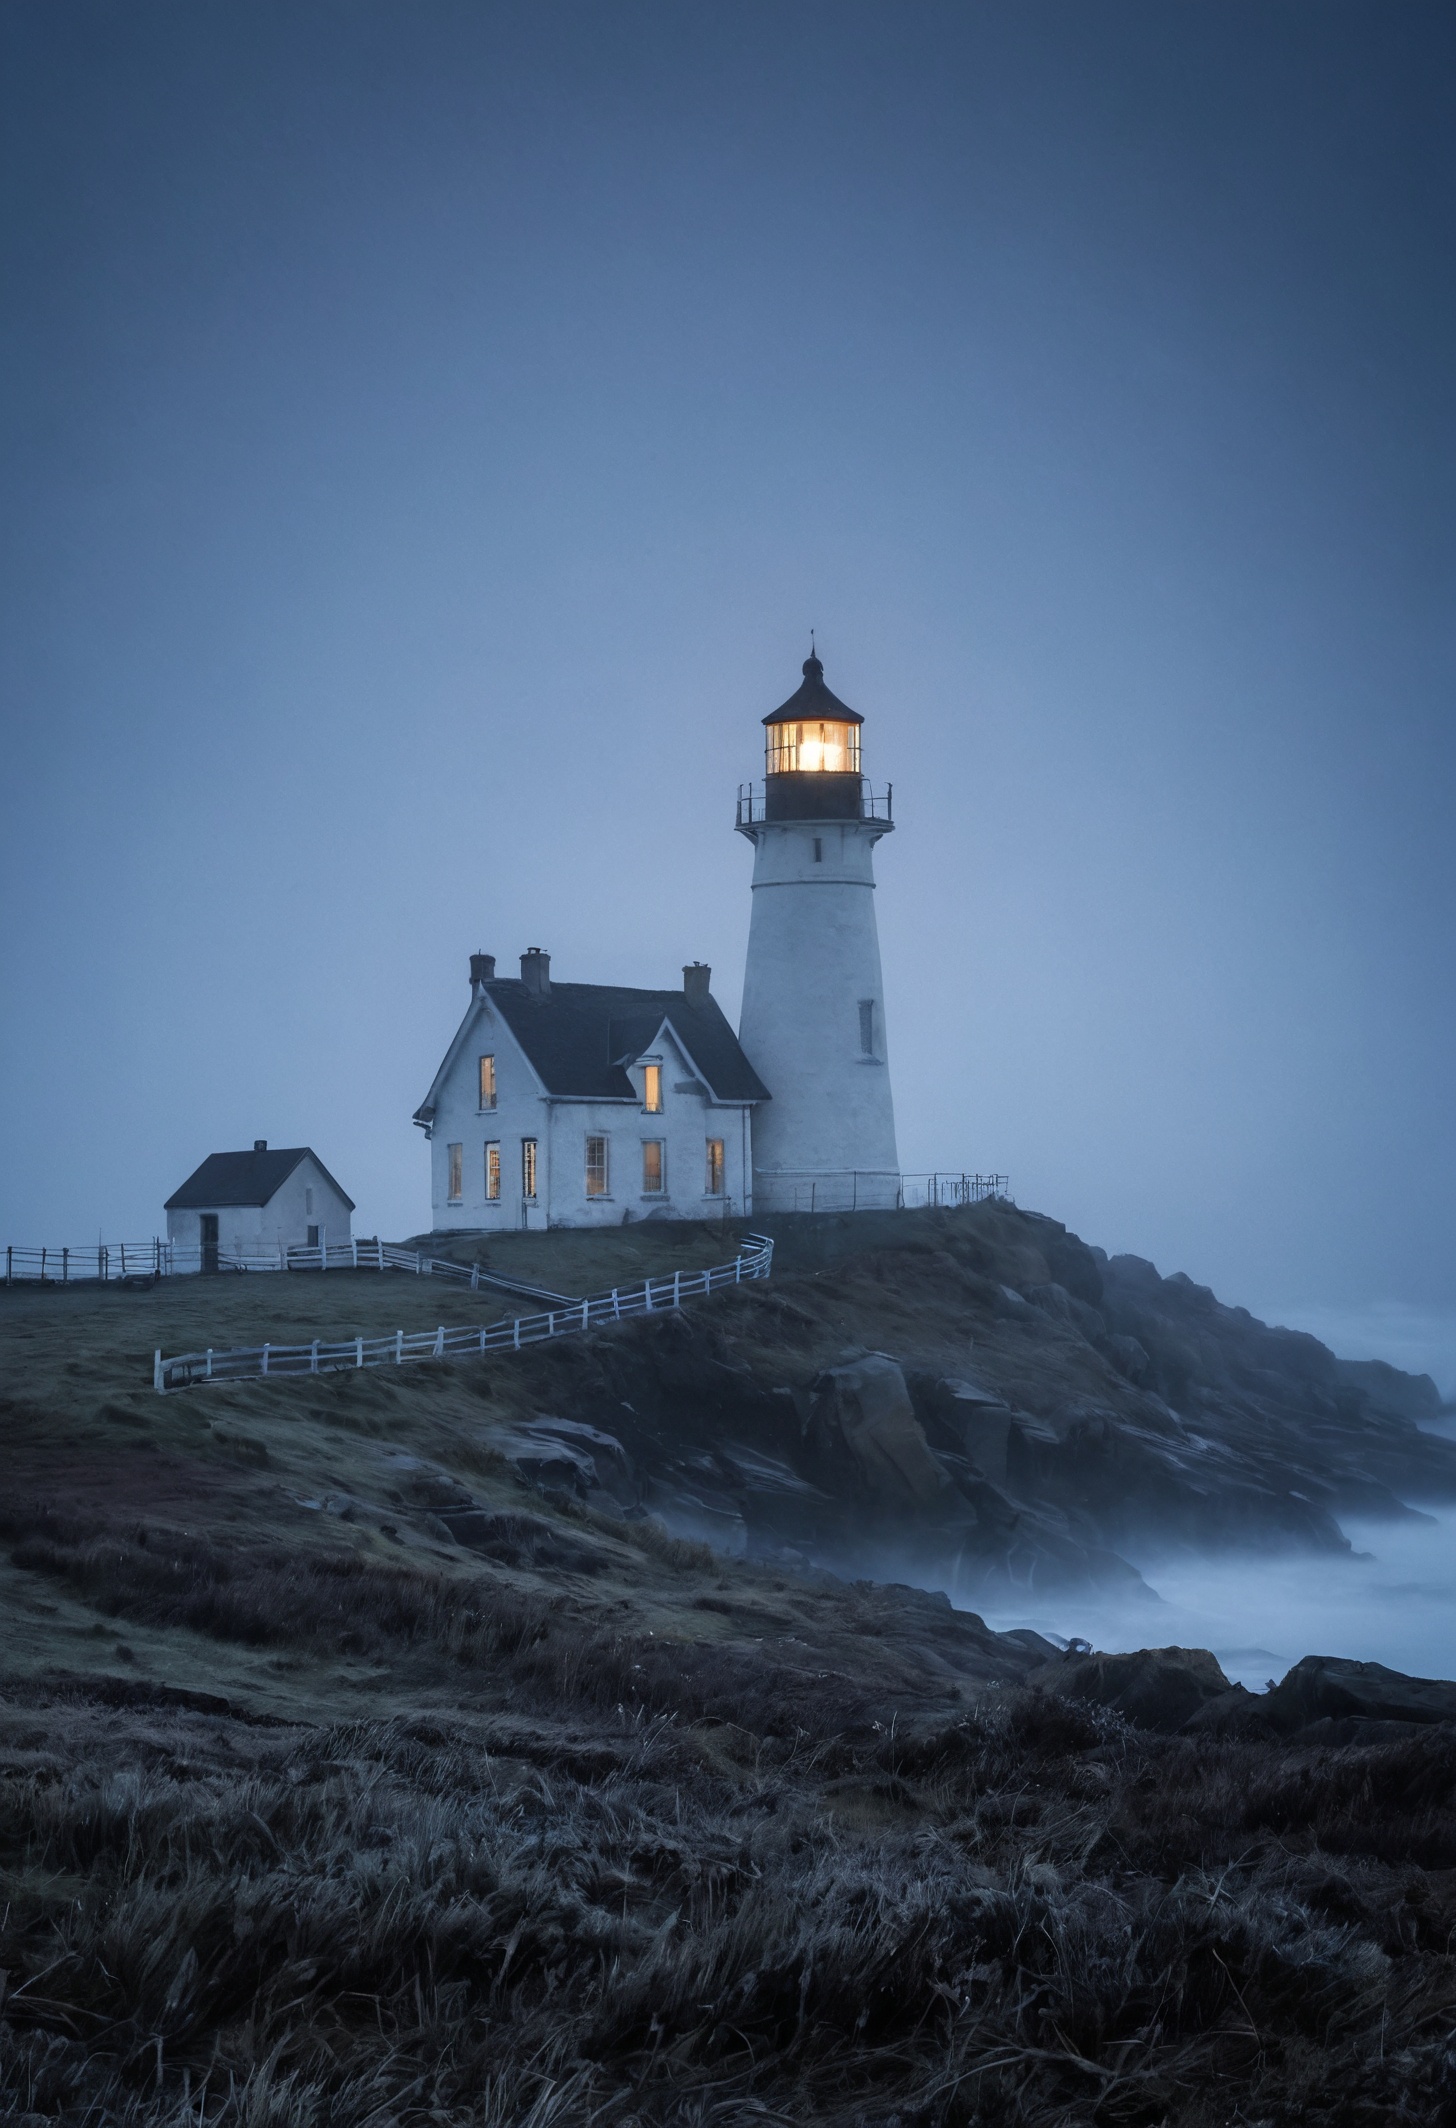 The island lighthouse in 'Melancholy Mists', enveloped by gentle, melancholic layers of midnight blue fog, evoking the introspective beauty of memories past in the delicate unfurling frost tendrils